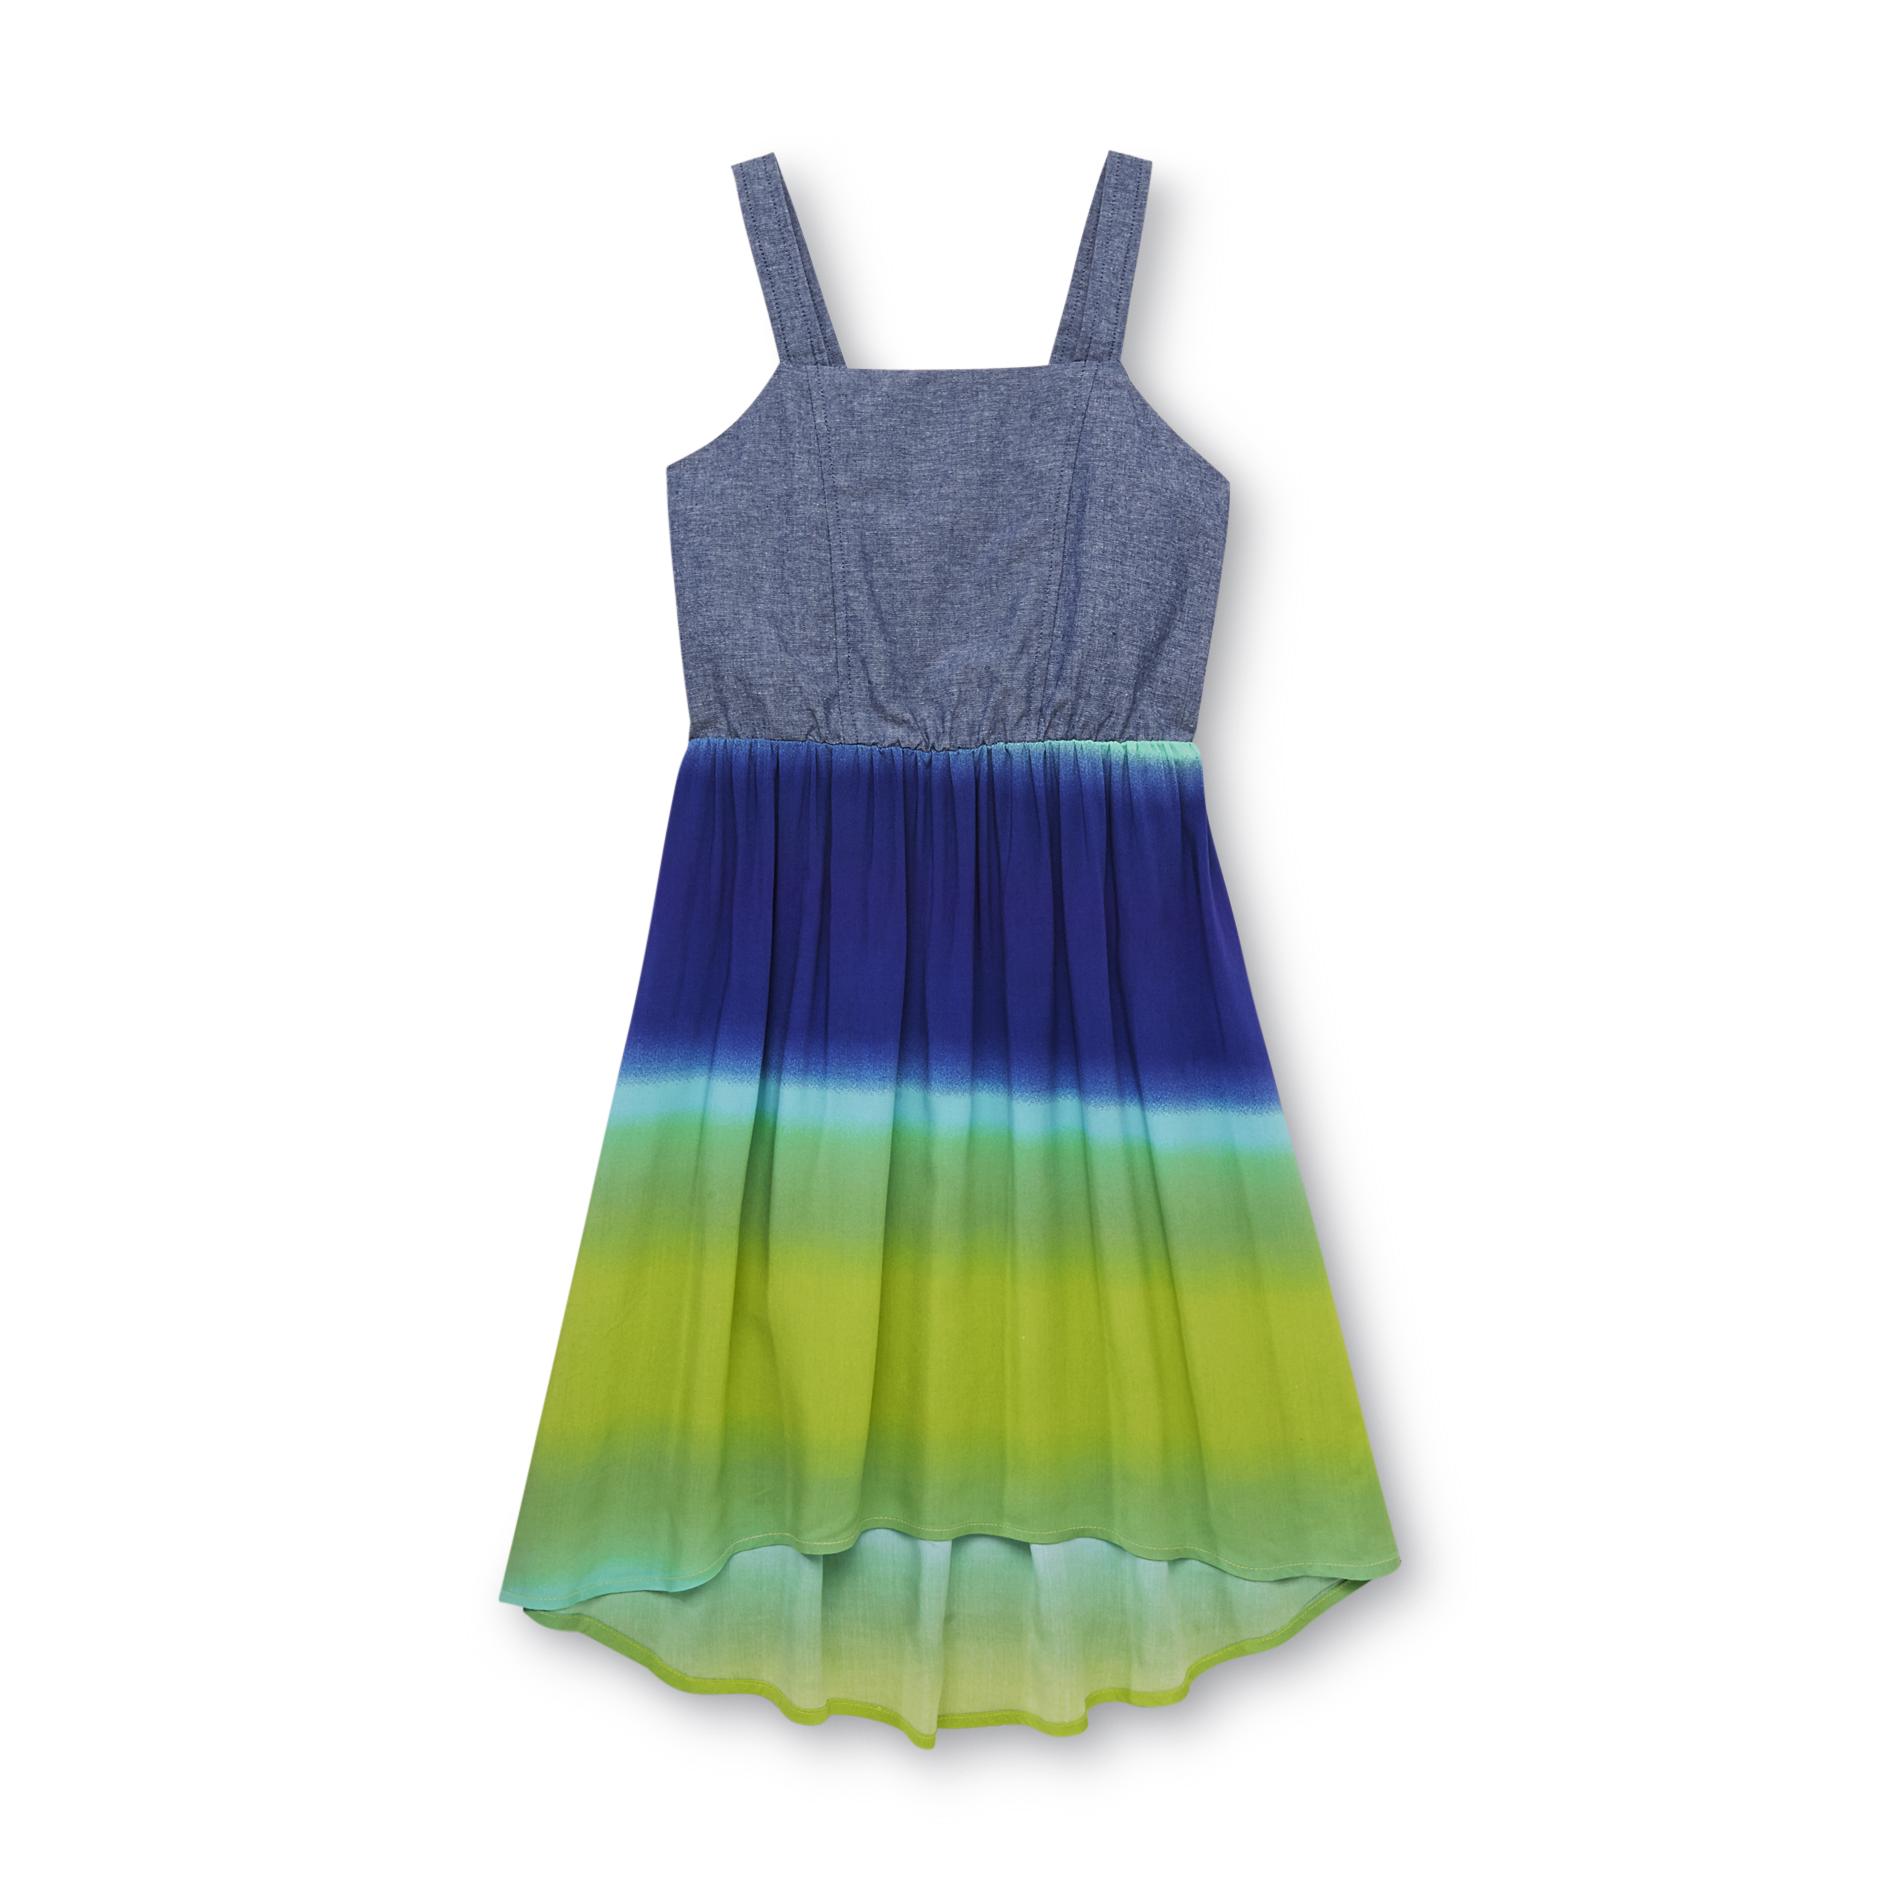 Route 66 Girl's High-Low Dress - Ombre